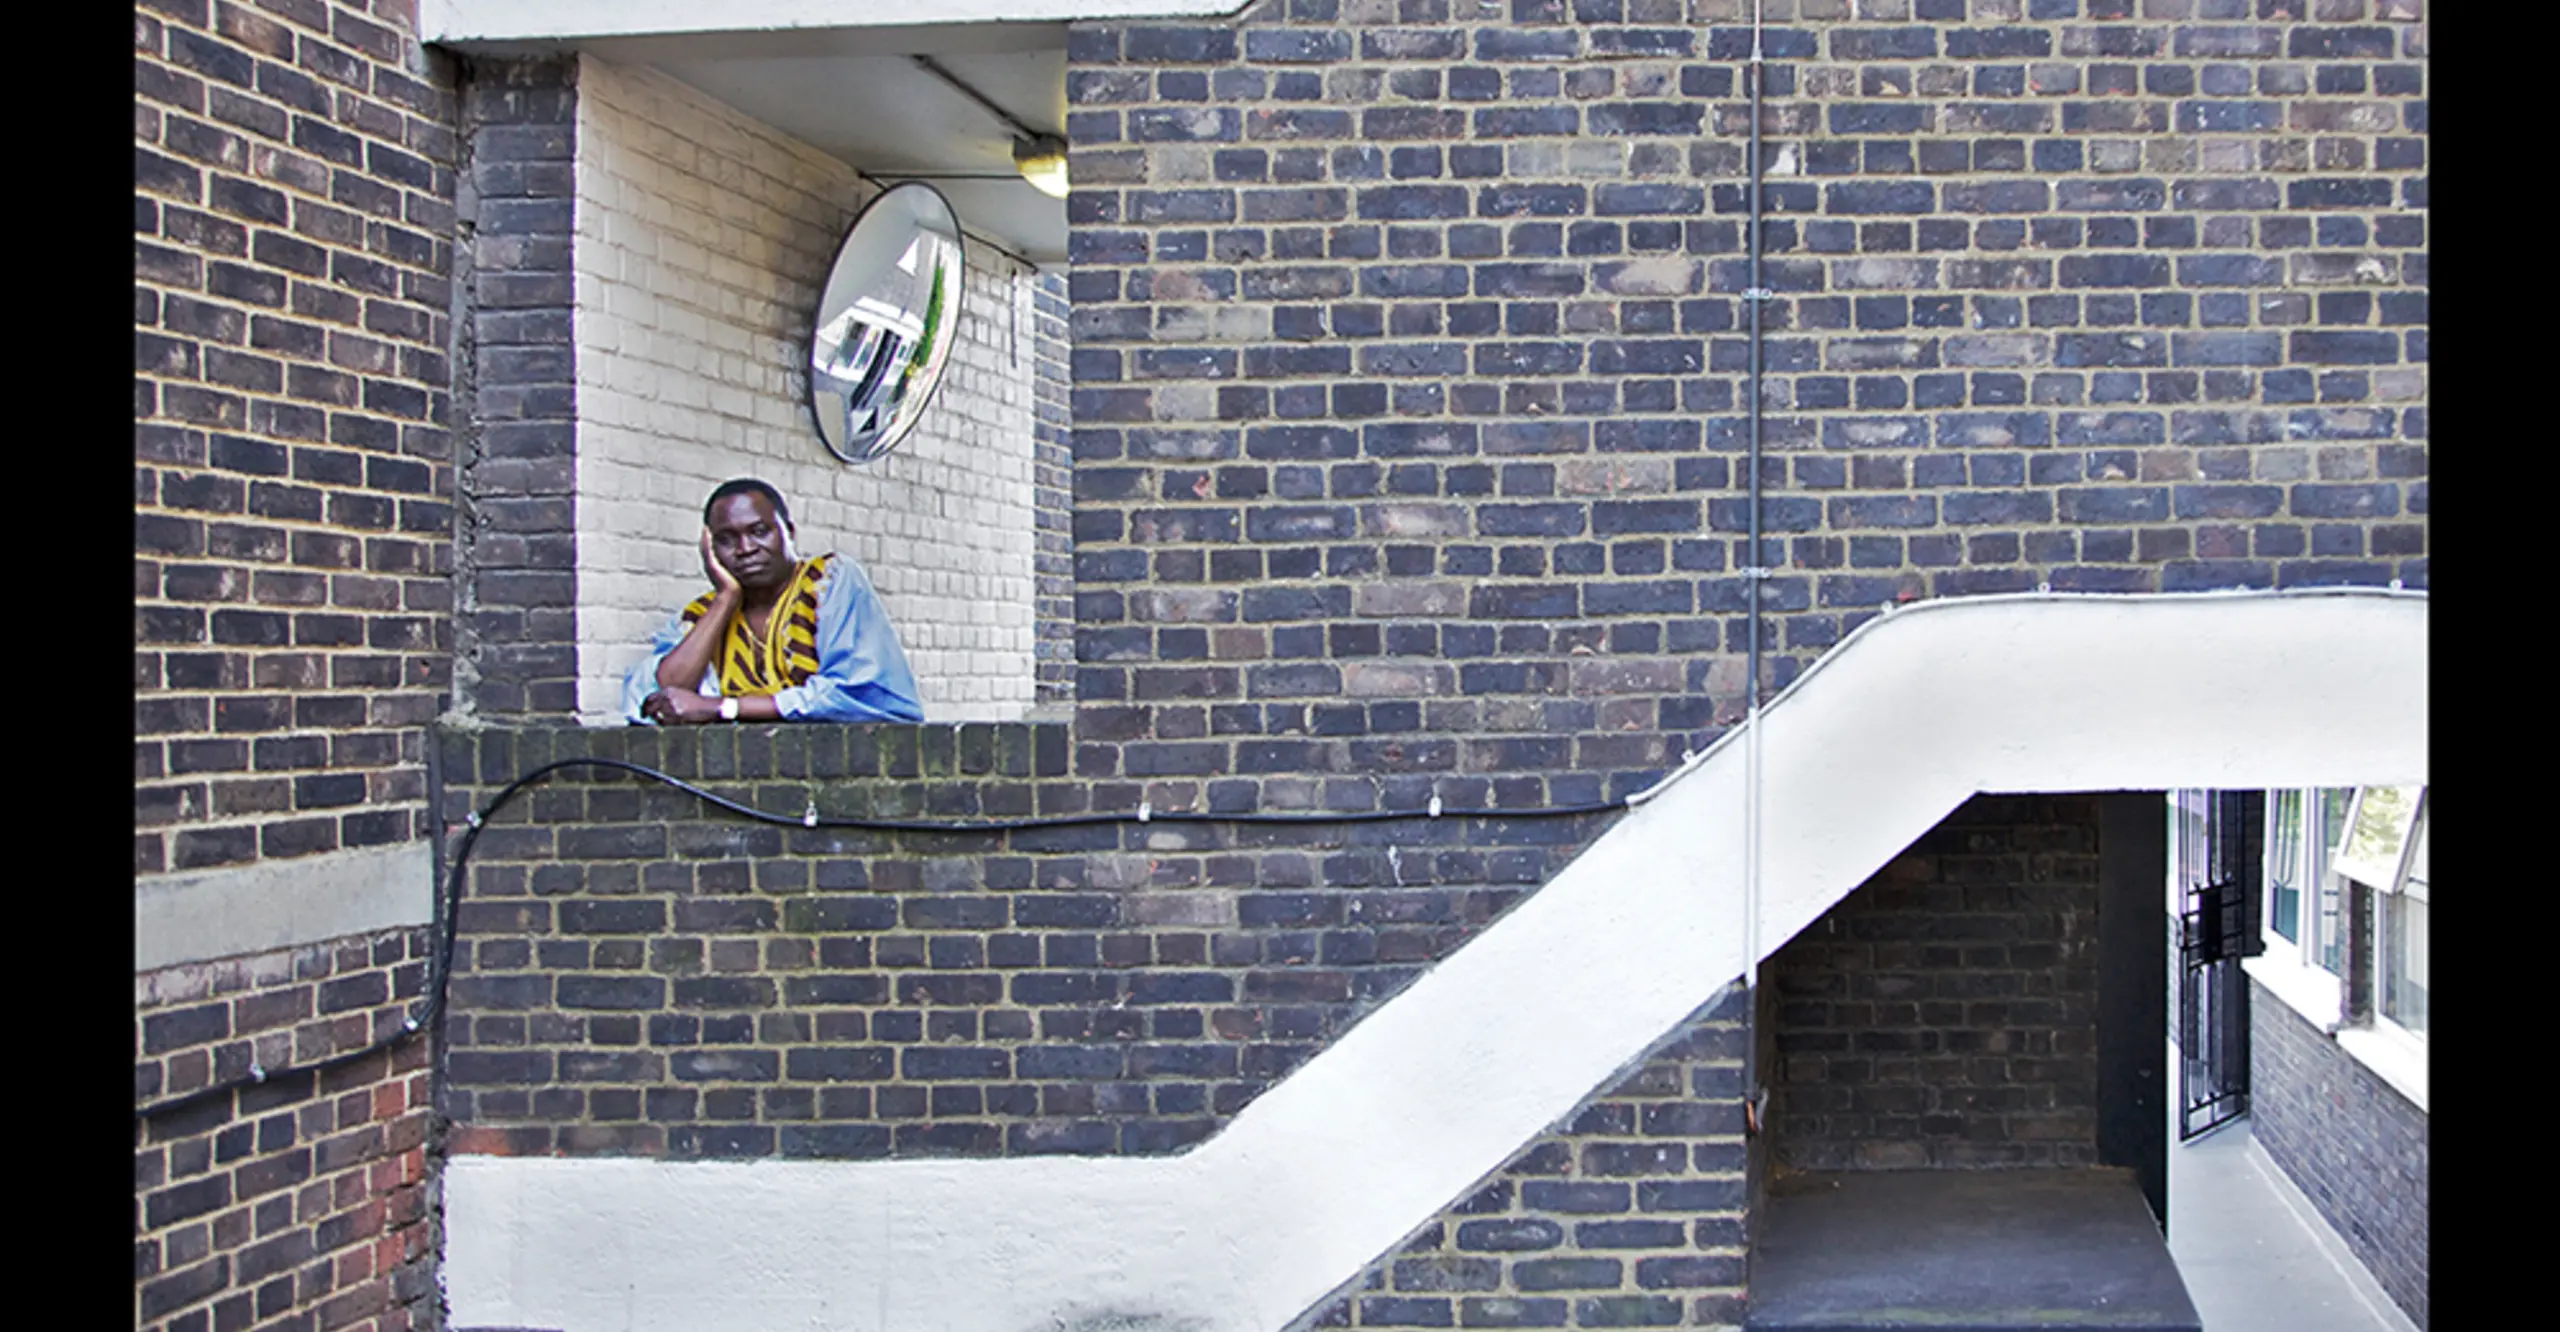 Souleymani Koanda looking at the camera on an outdoors stairway. The photographs is signed by Briony Campbell 